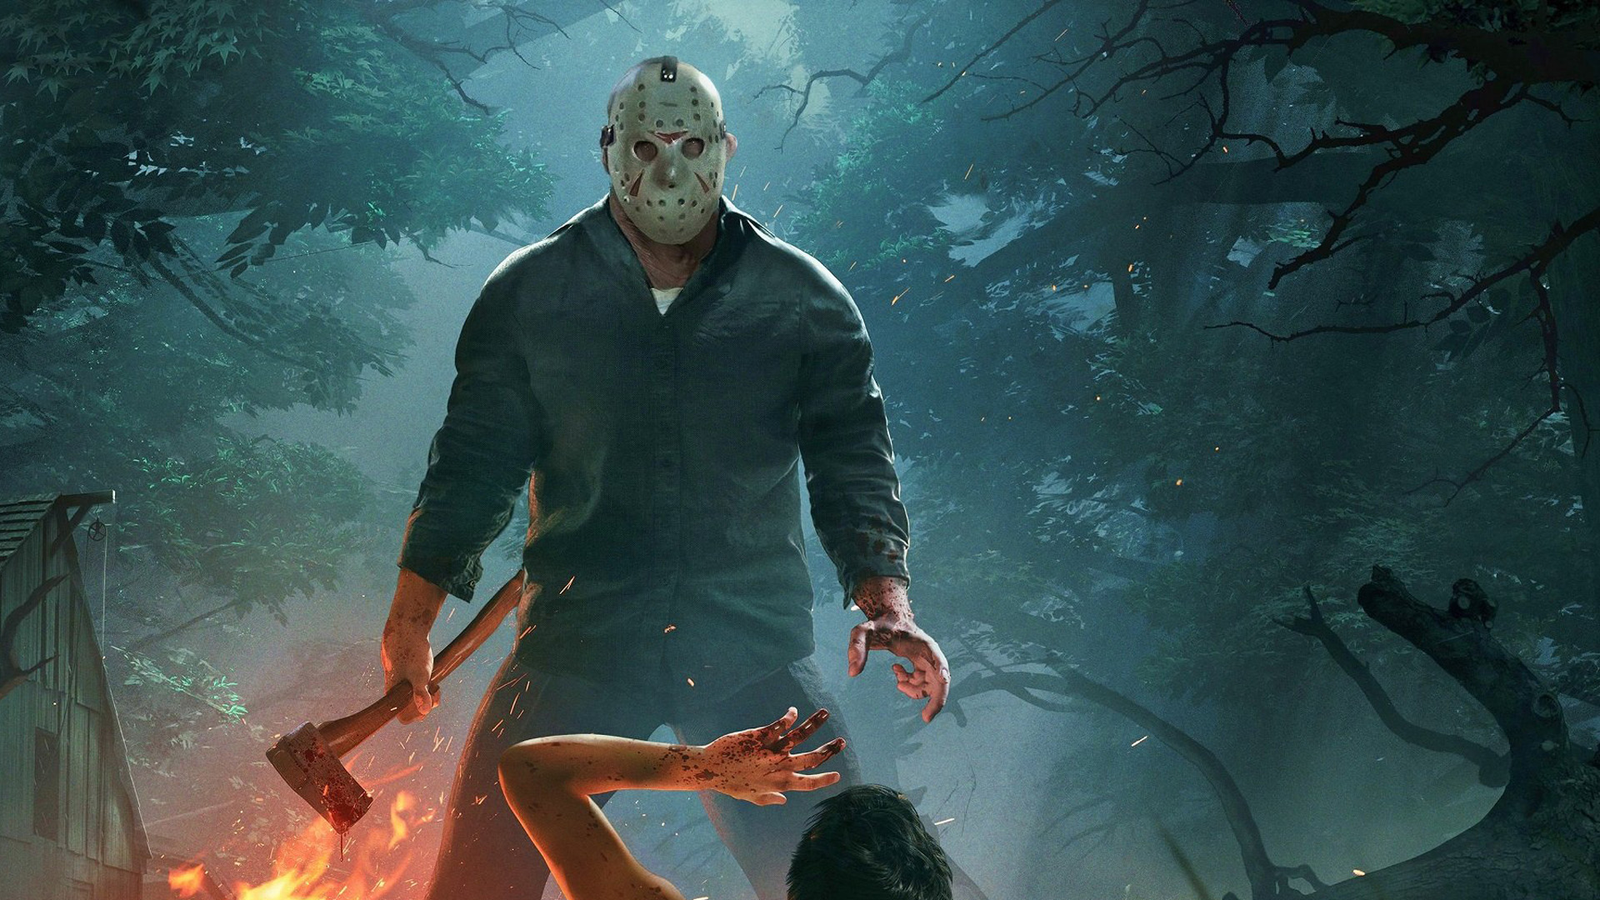 Friday the 13th: The Game to be pulled from sale when license expires